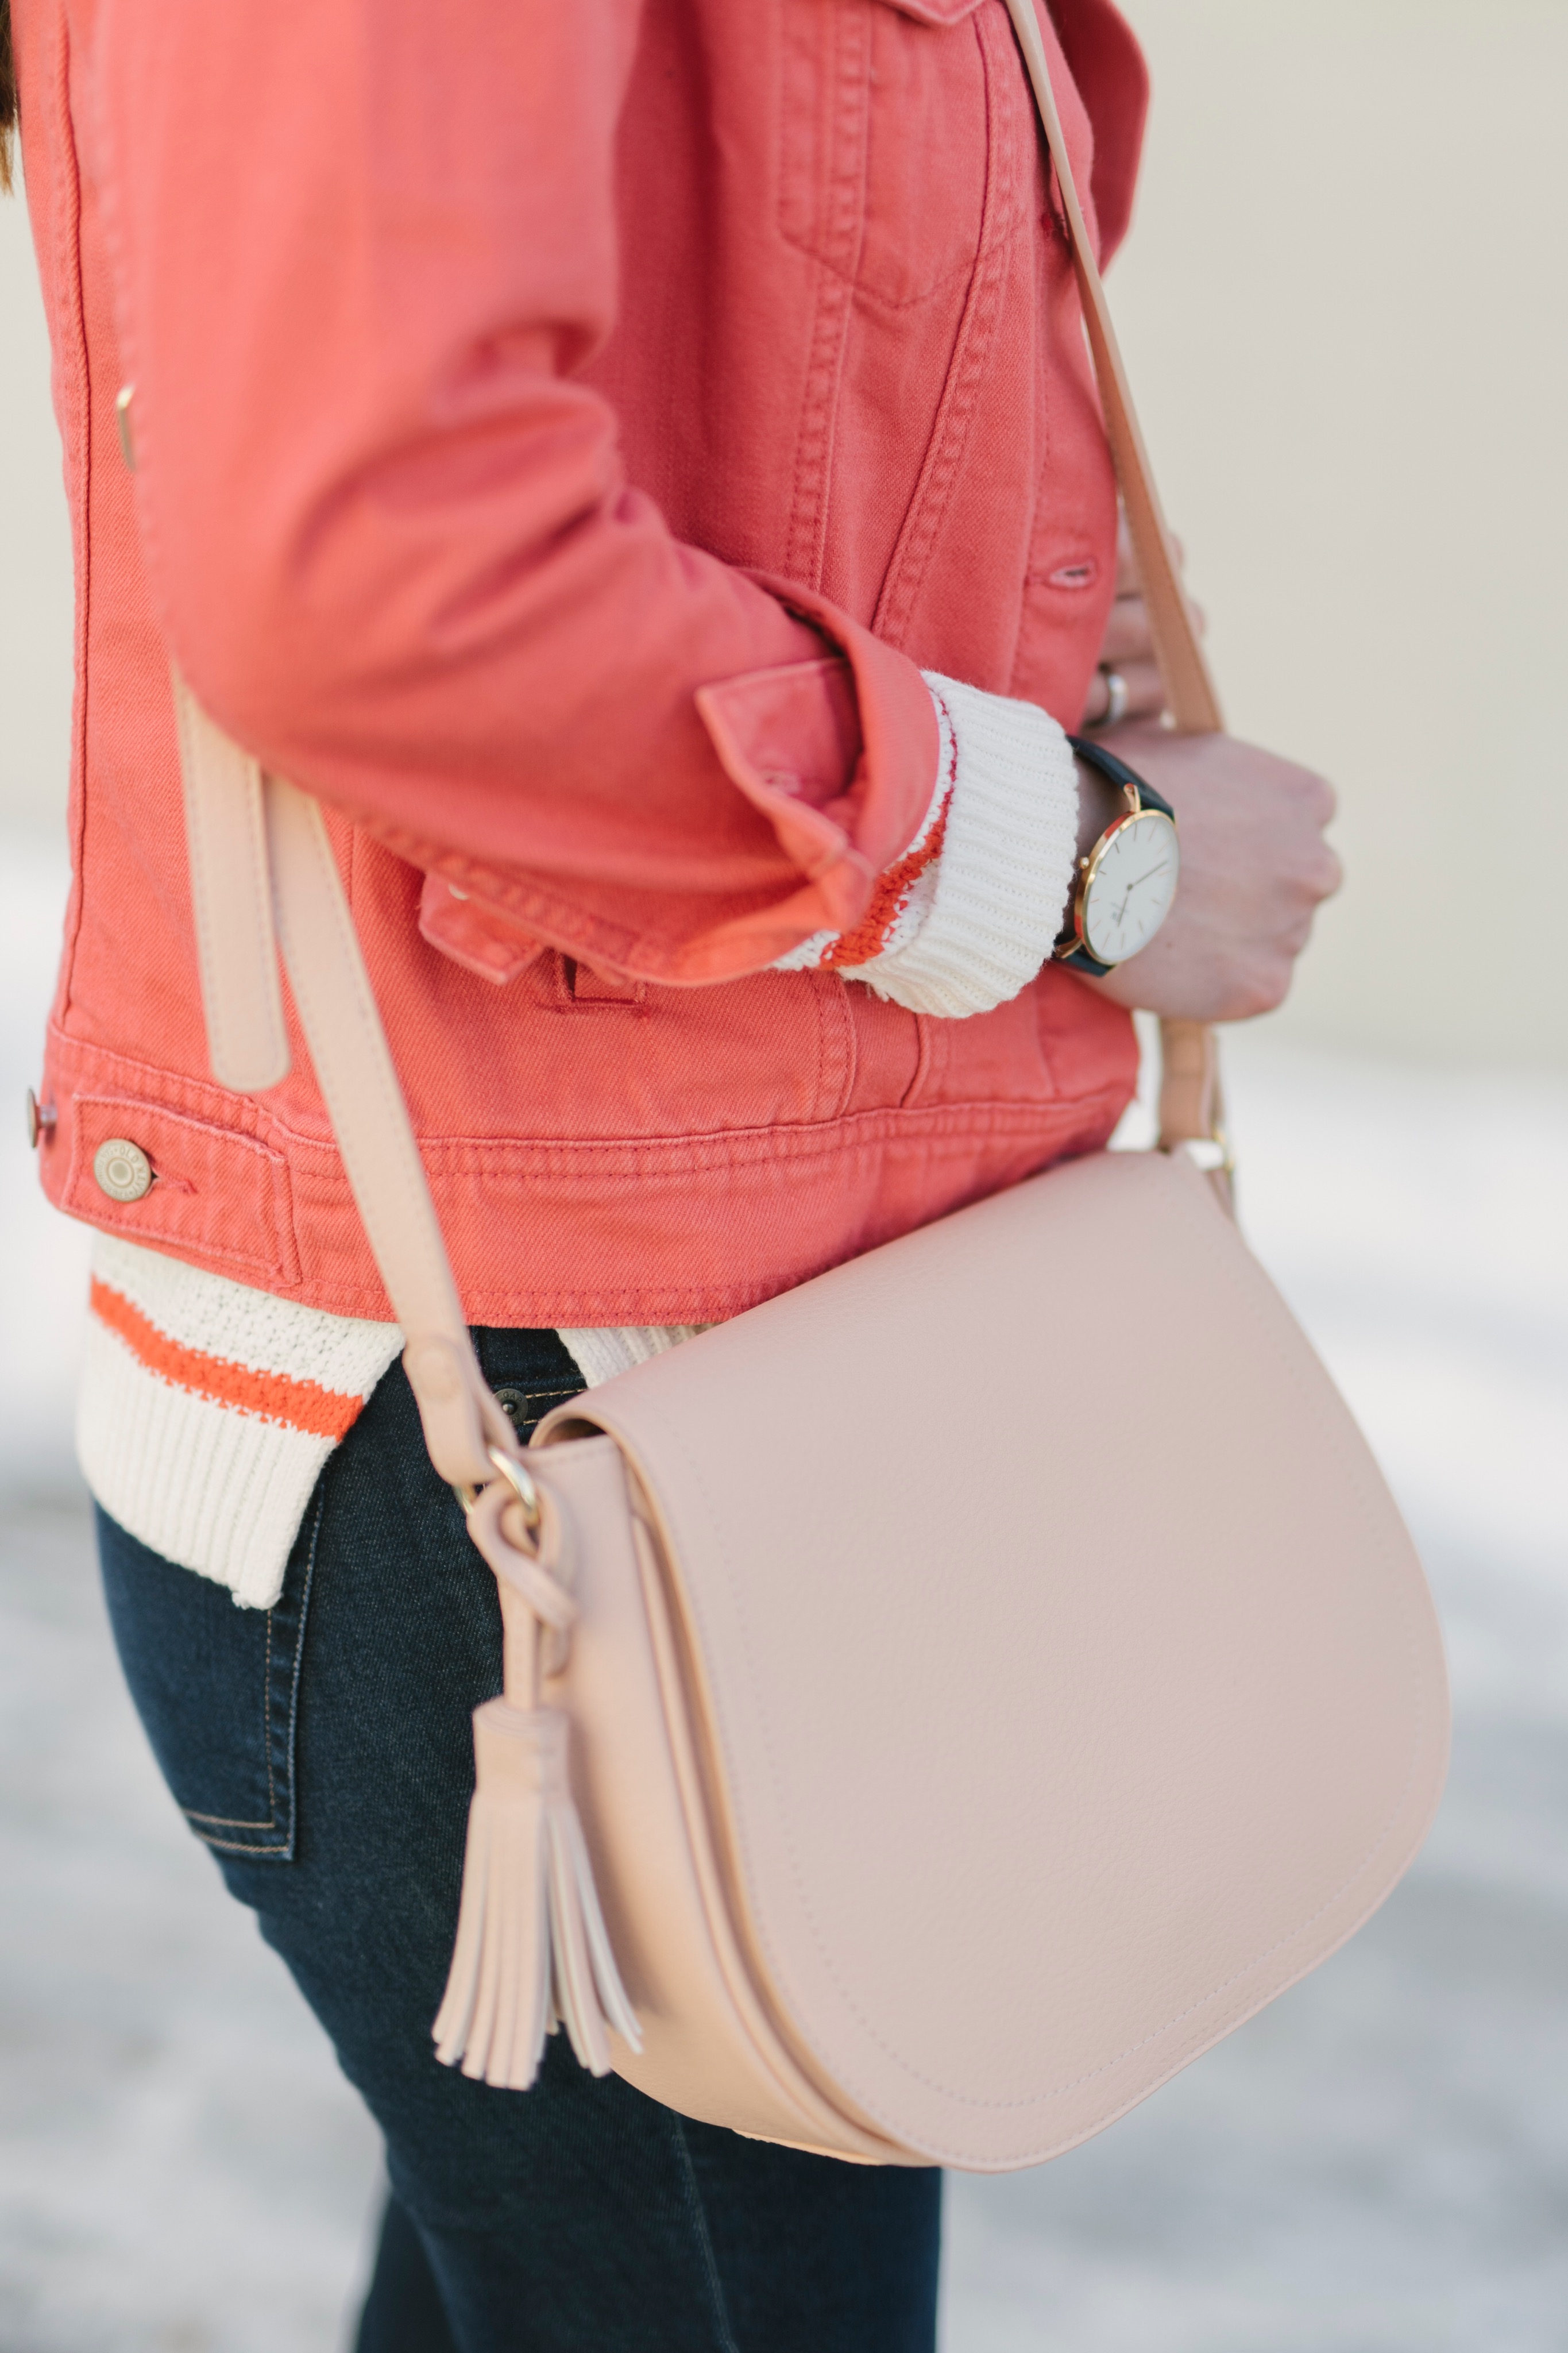 casual spring outfit idea | via Finding Beautiful Truth